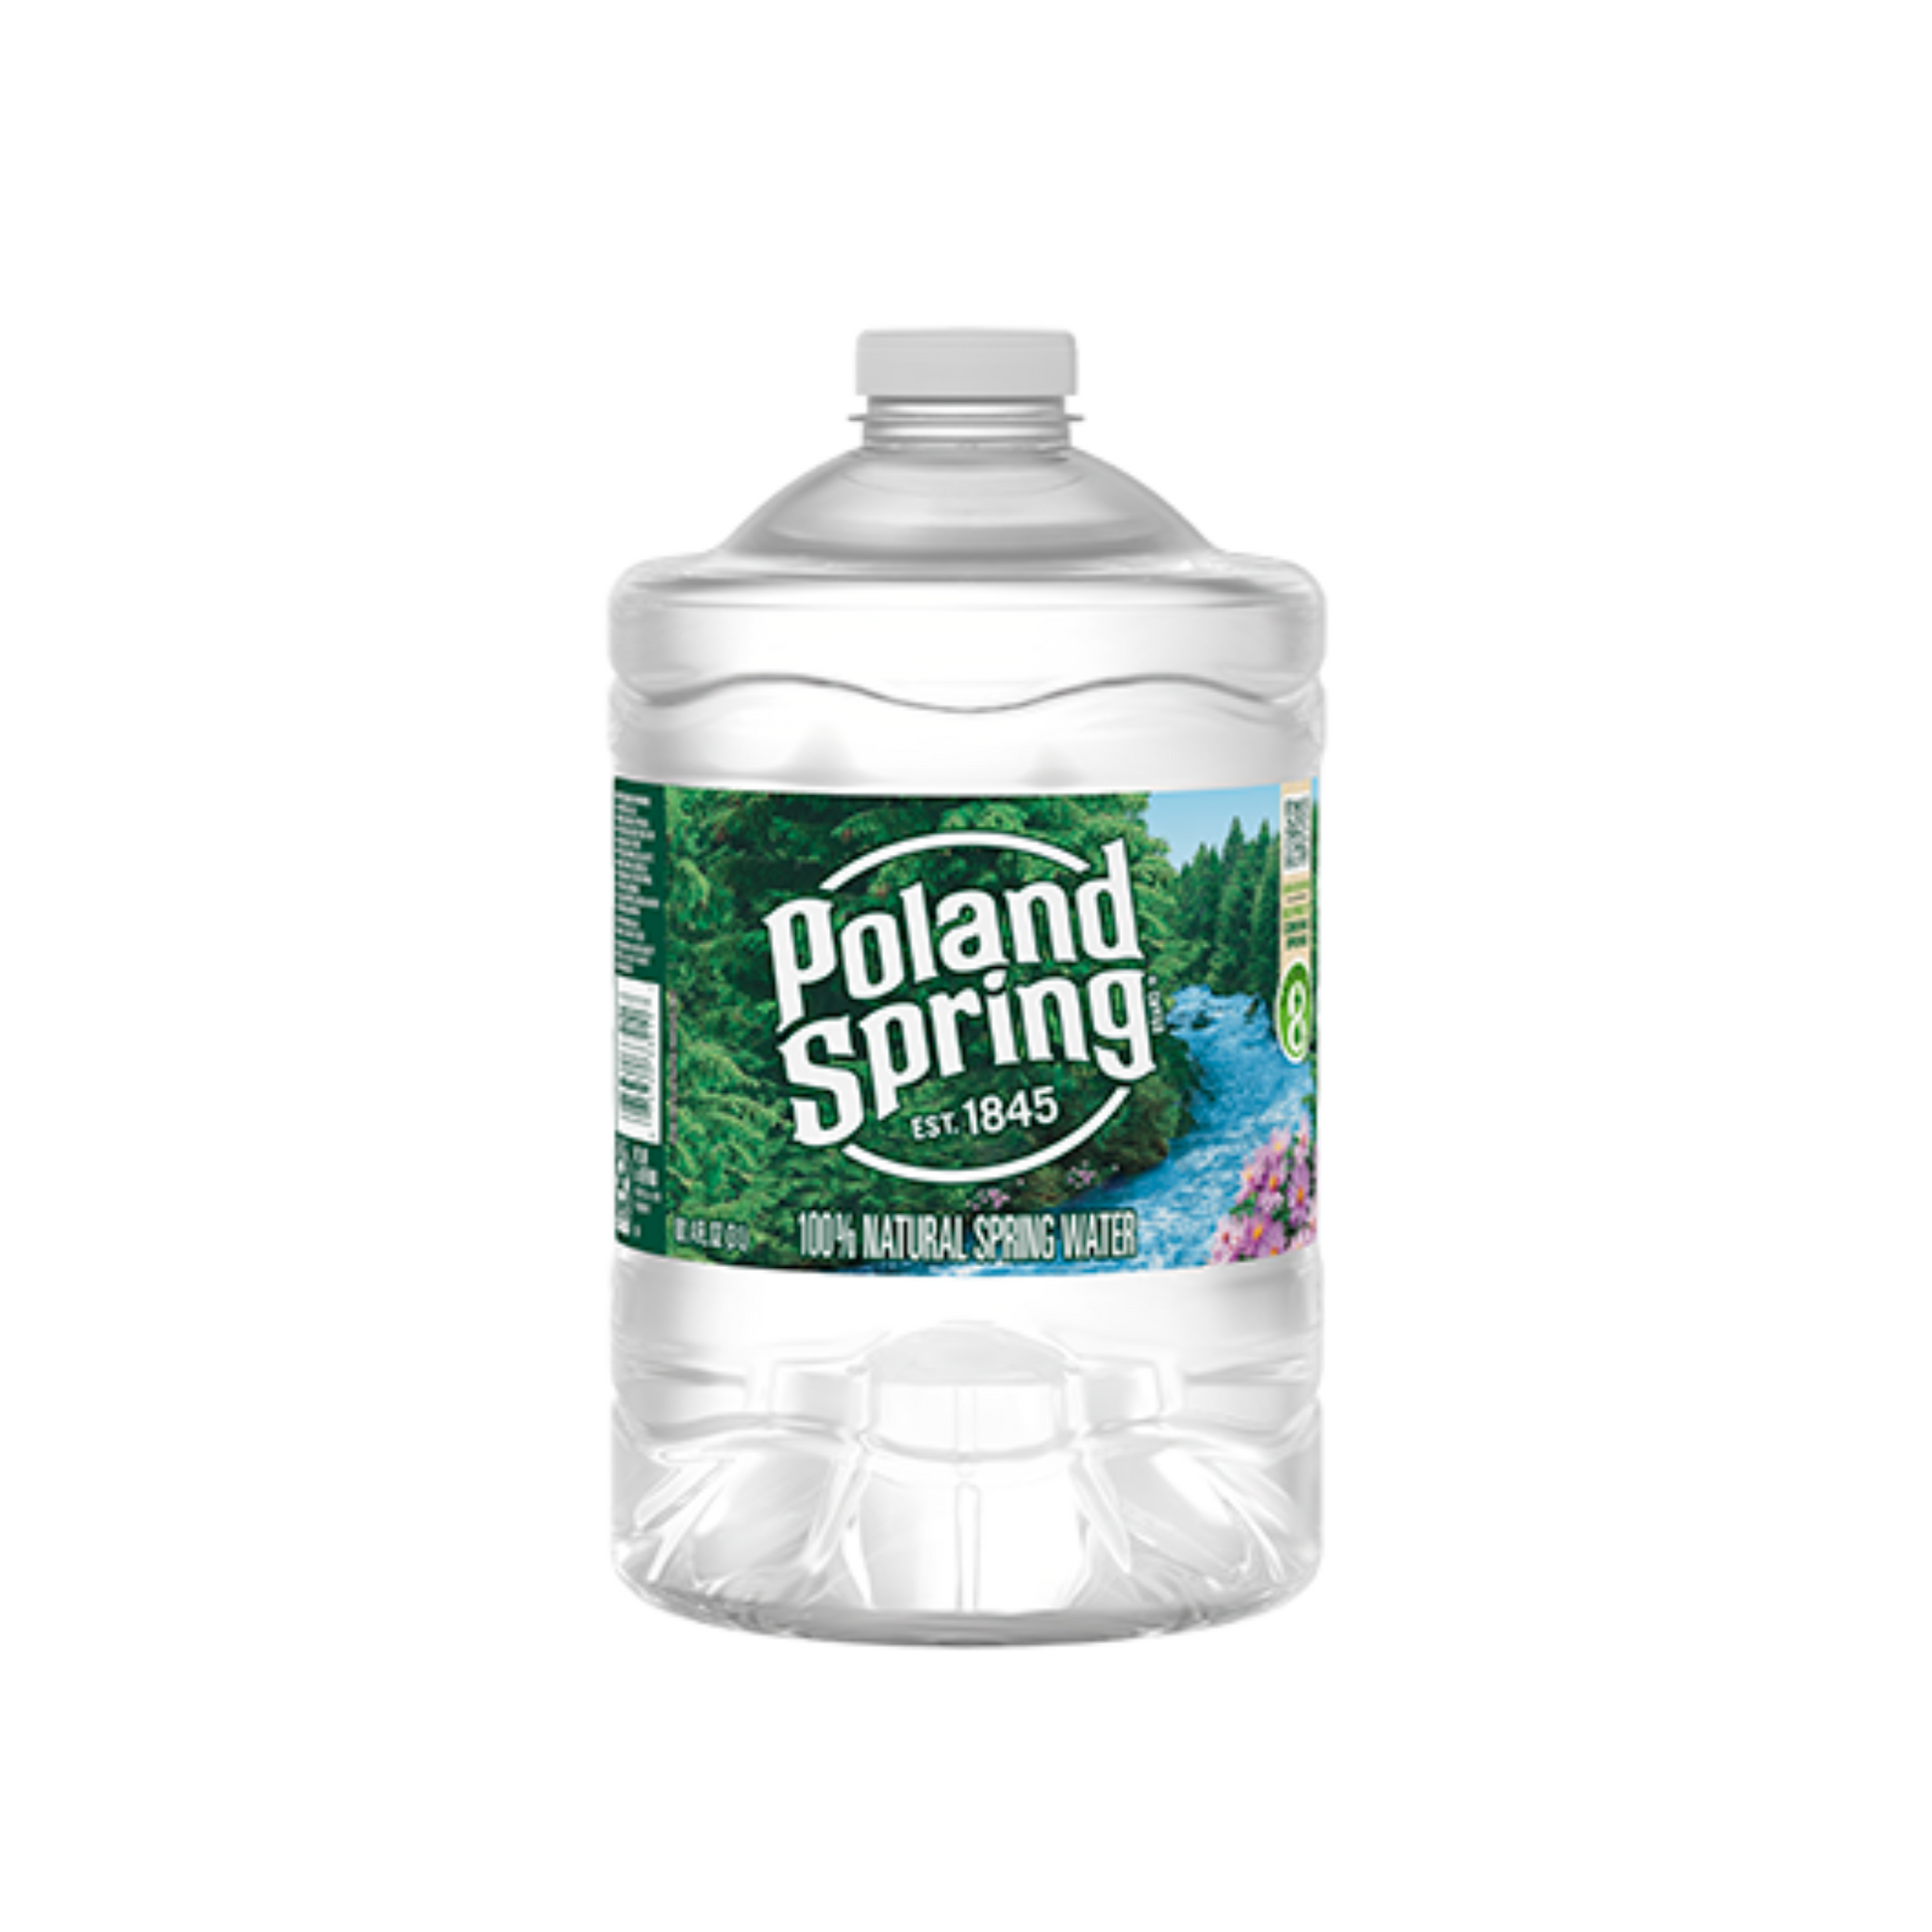 Buy Poland Spring 6-Pack 3L Bottles, Stay Hydrated Anytime and Anywhere